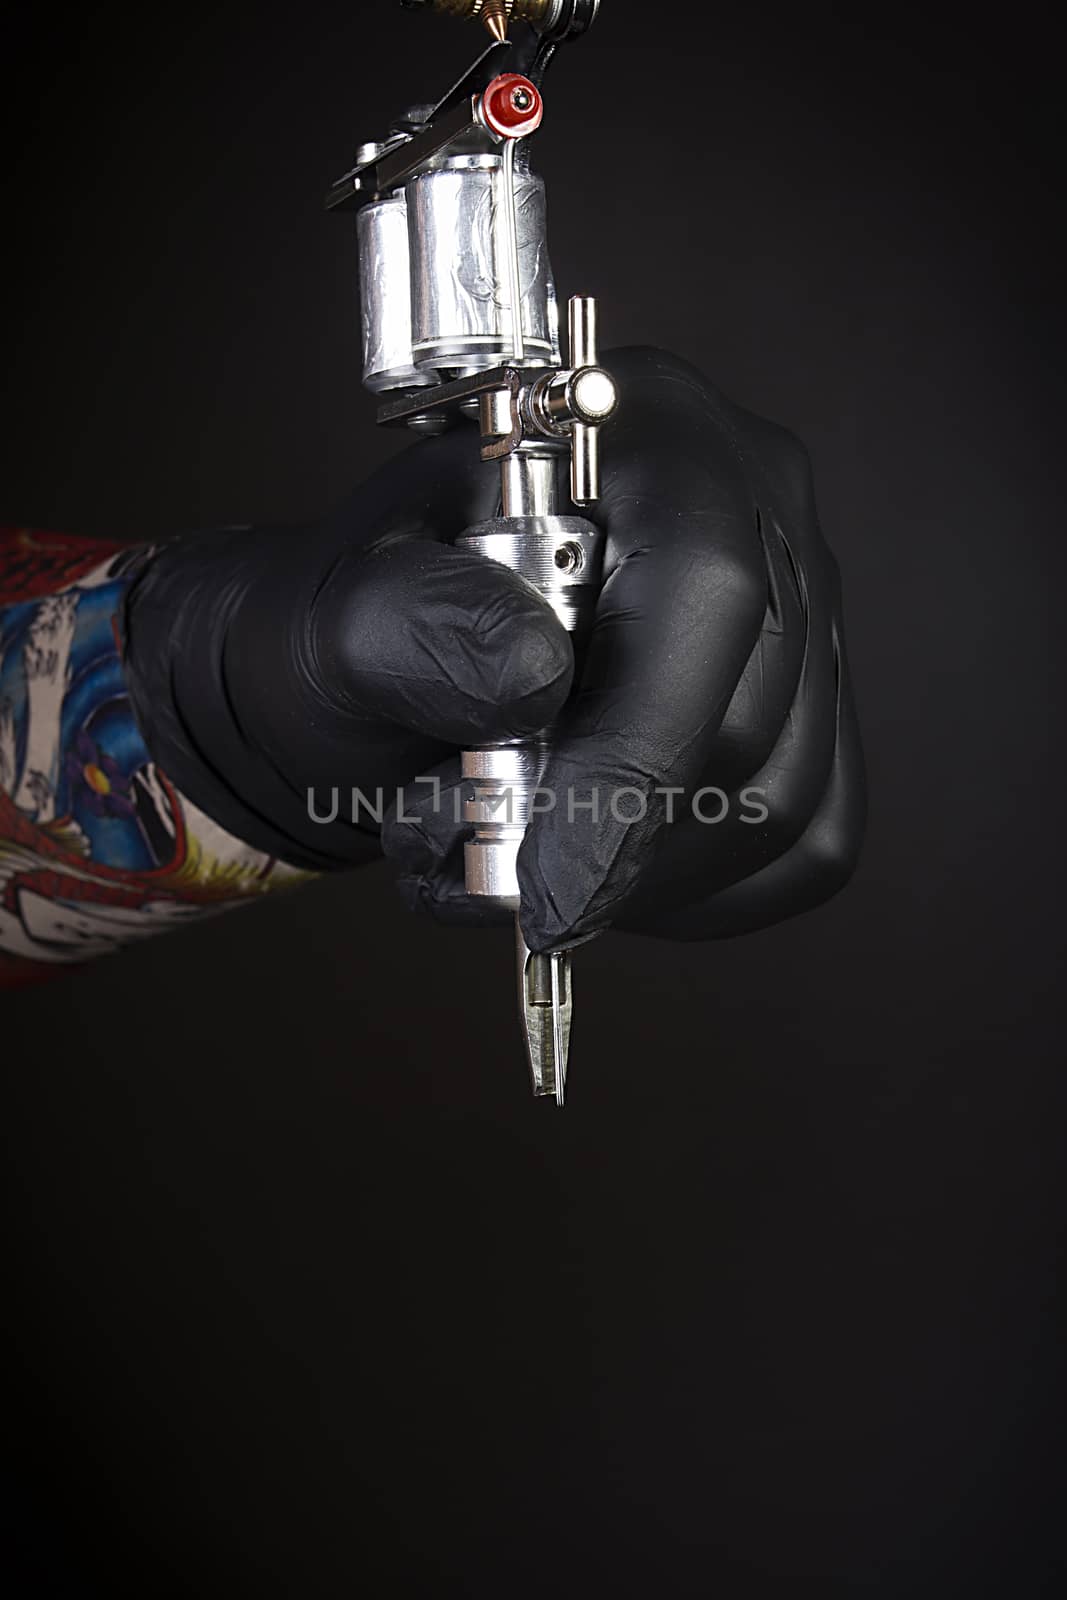 Tattoo machine in artist’s hand isolated on black background